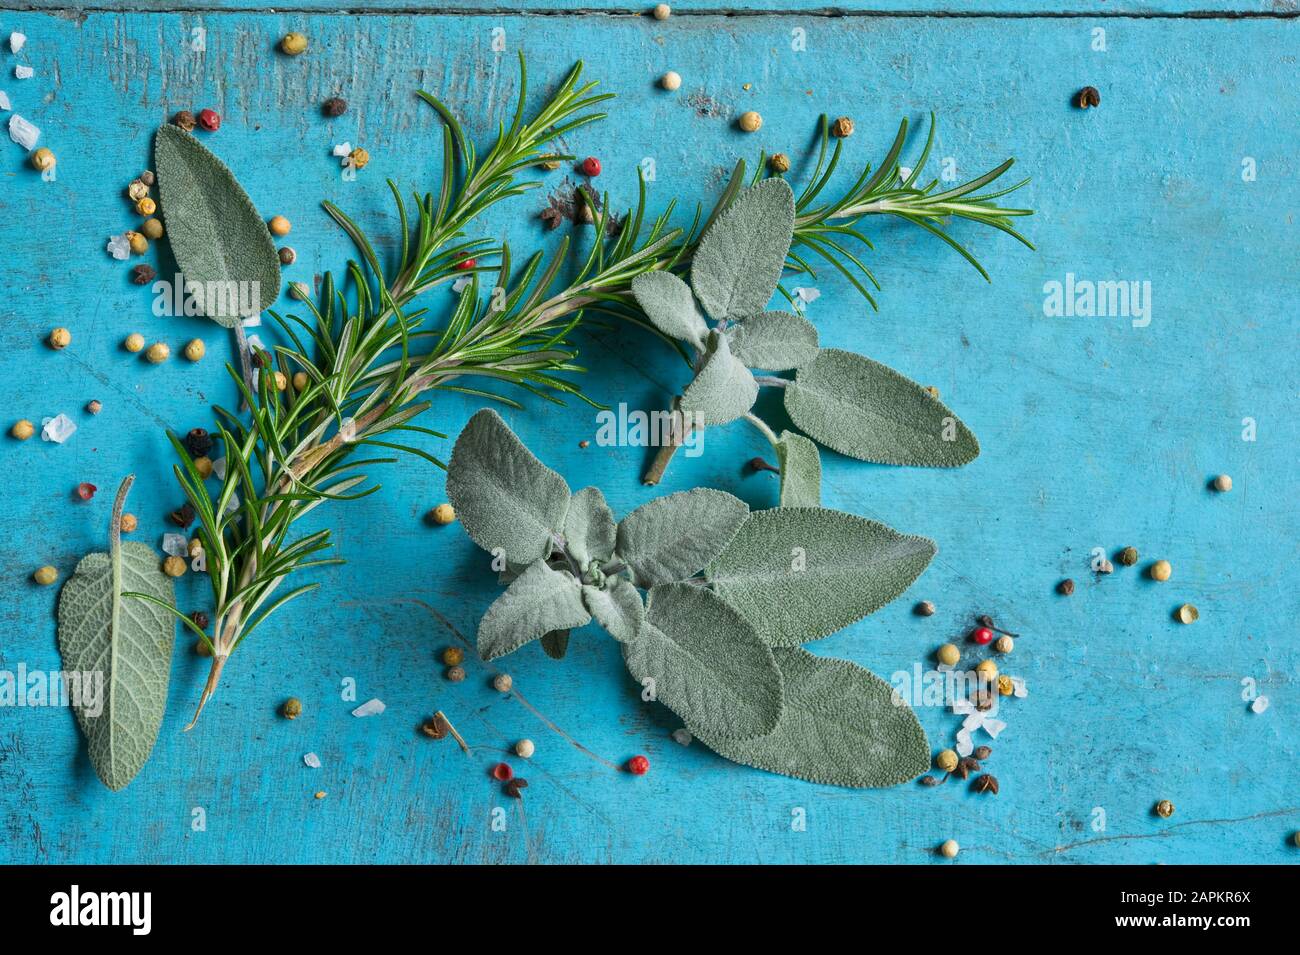 Rosemary, sage, salt and pepper lying on blue cutting board Stock Photo